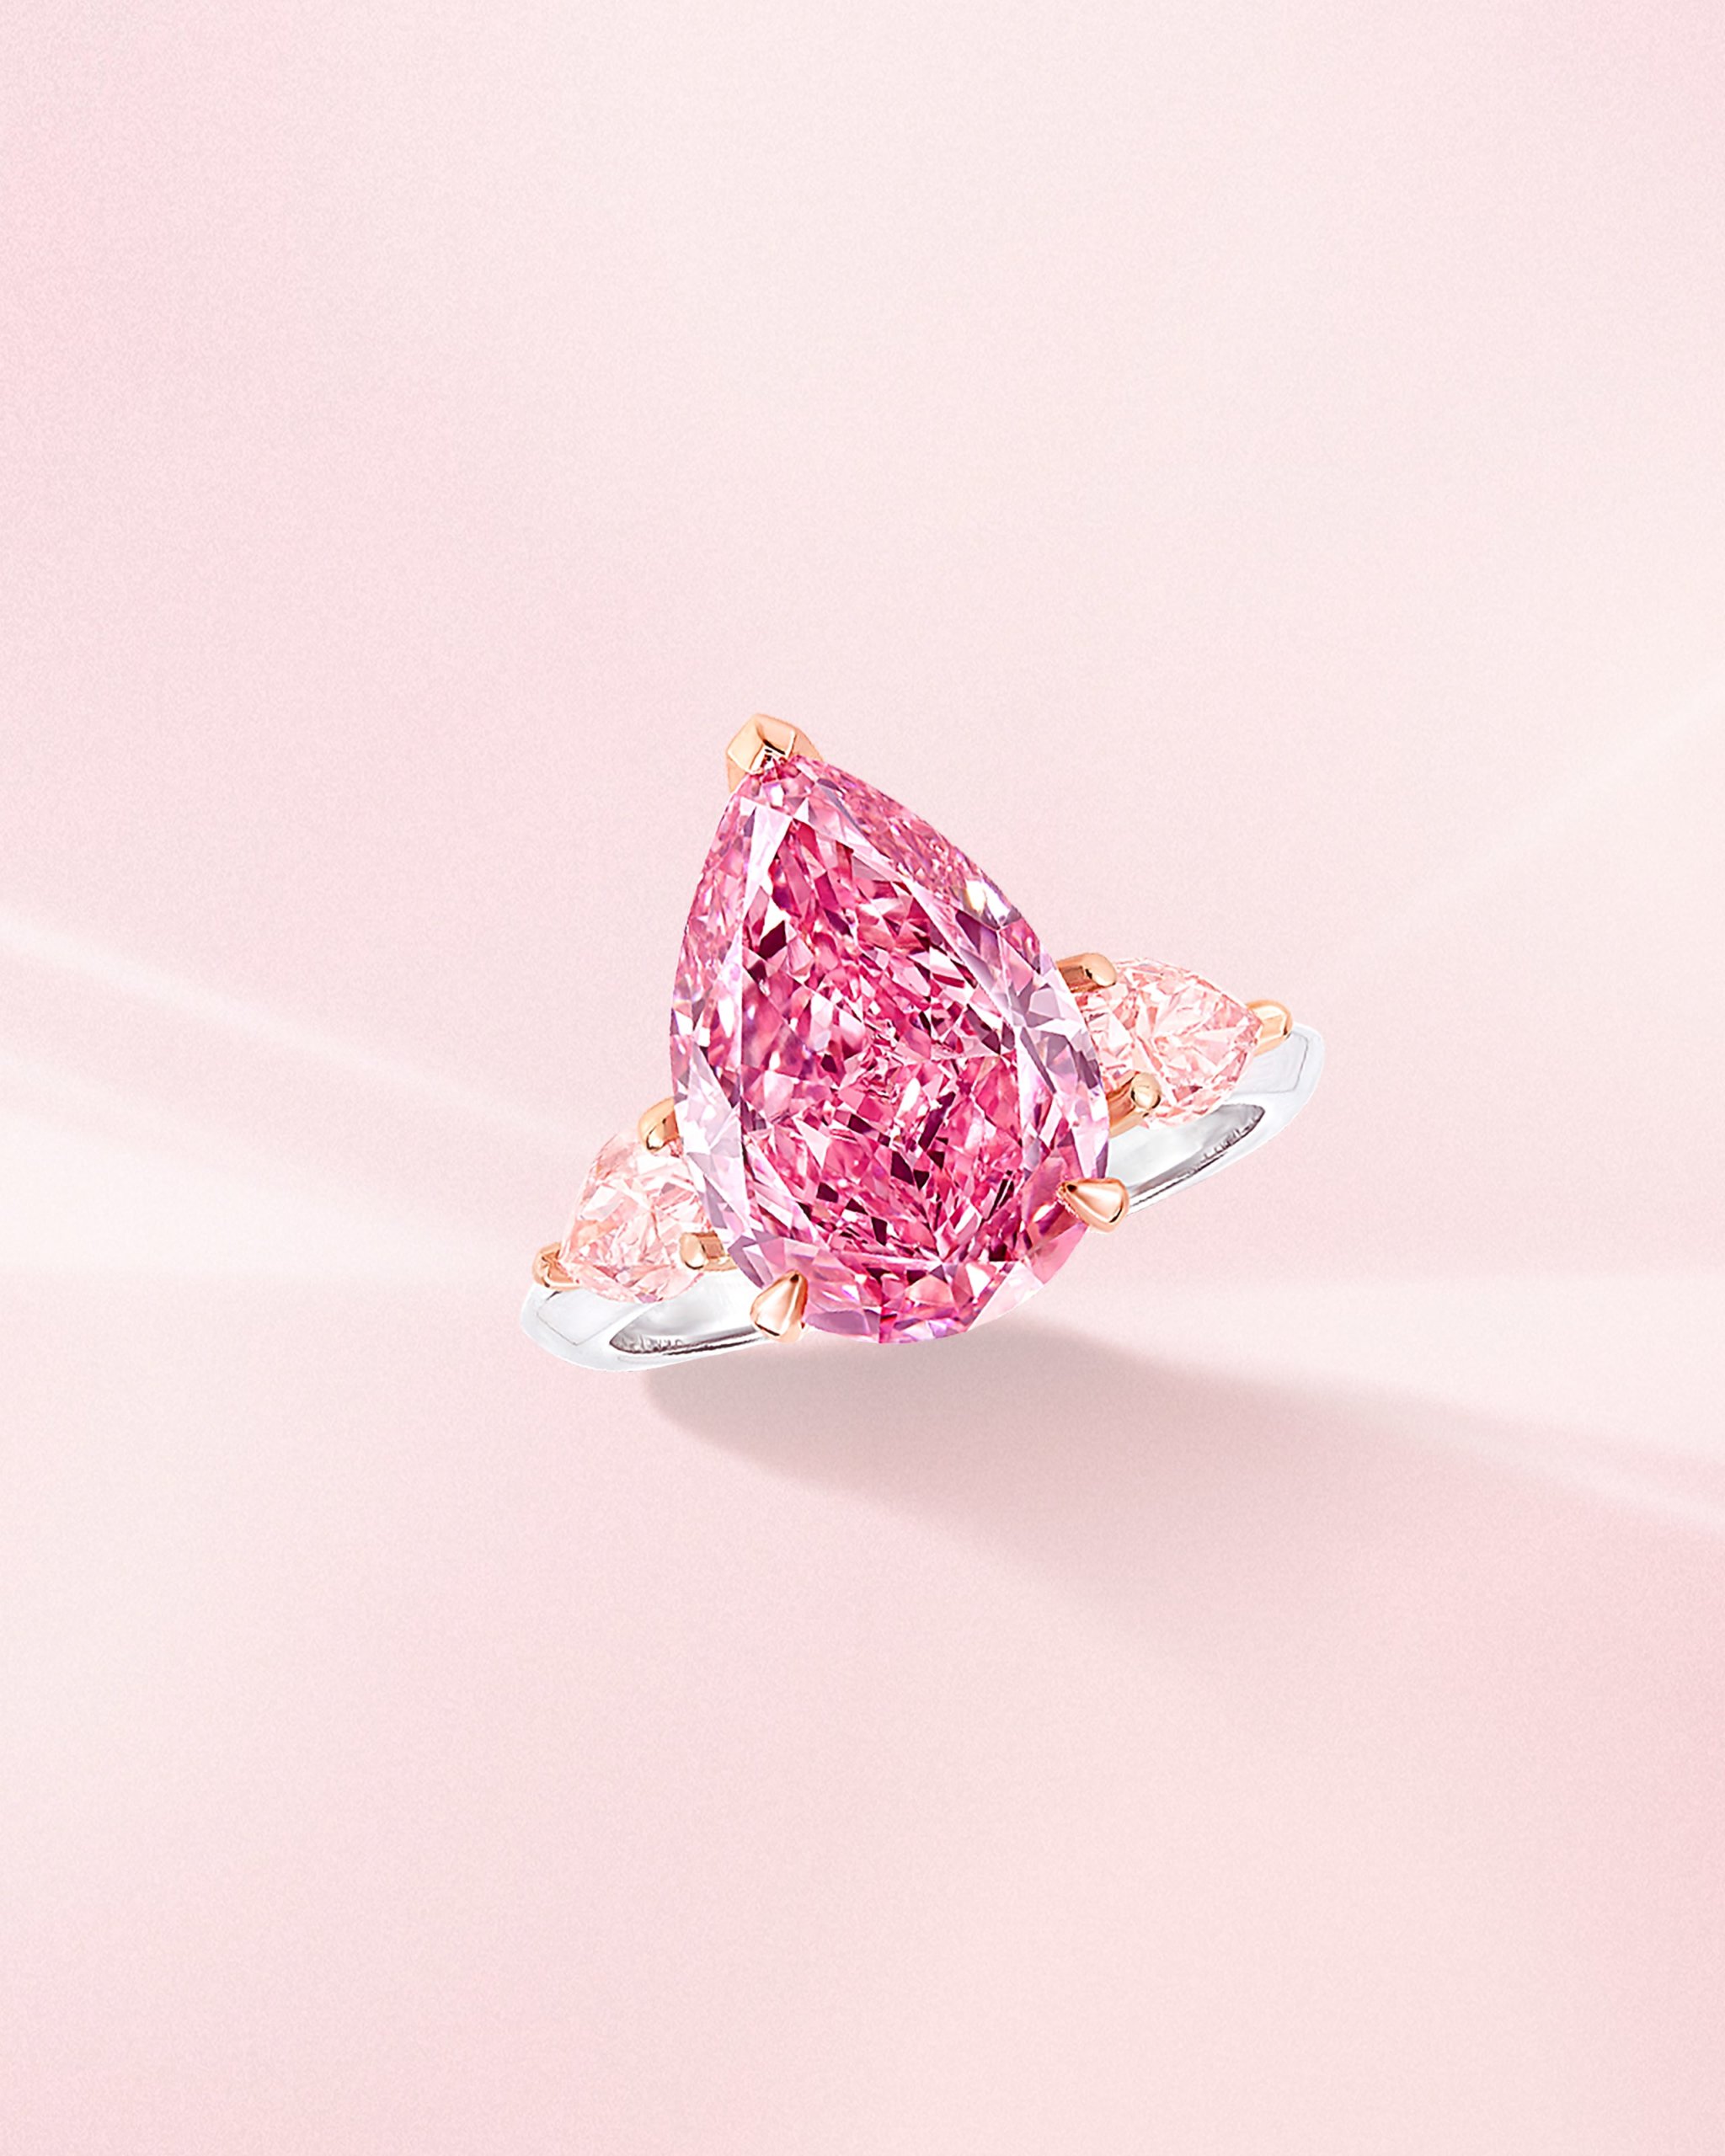 Fancy vivid pink pear shaped diamond ring with side light pink diamonds on a platinum band from Graff